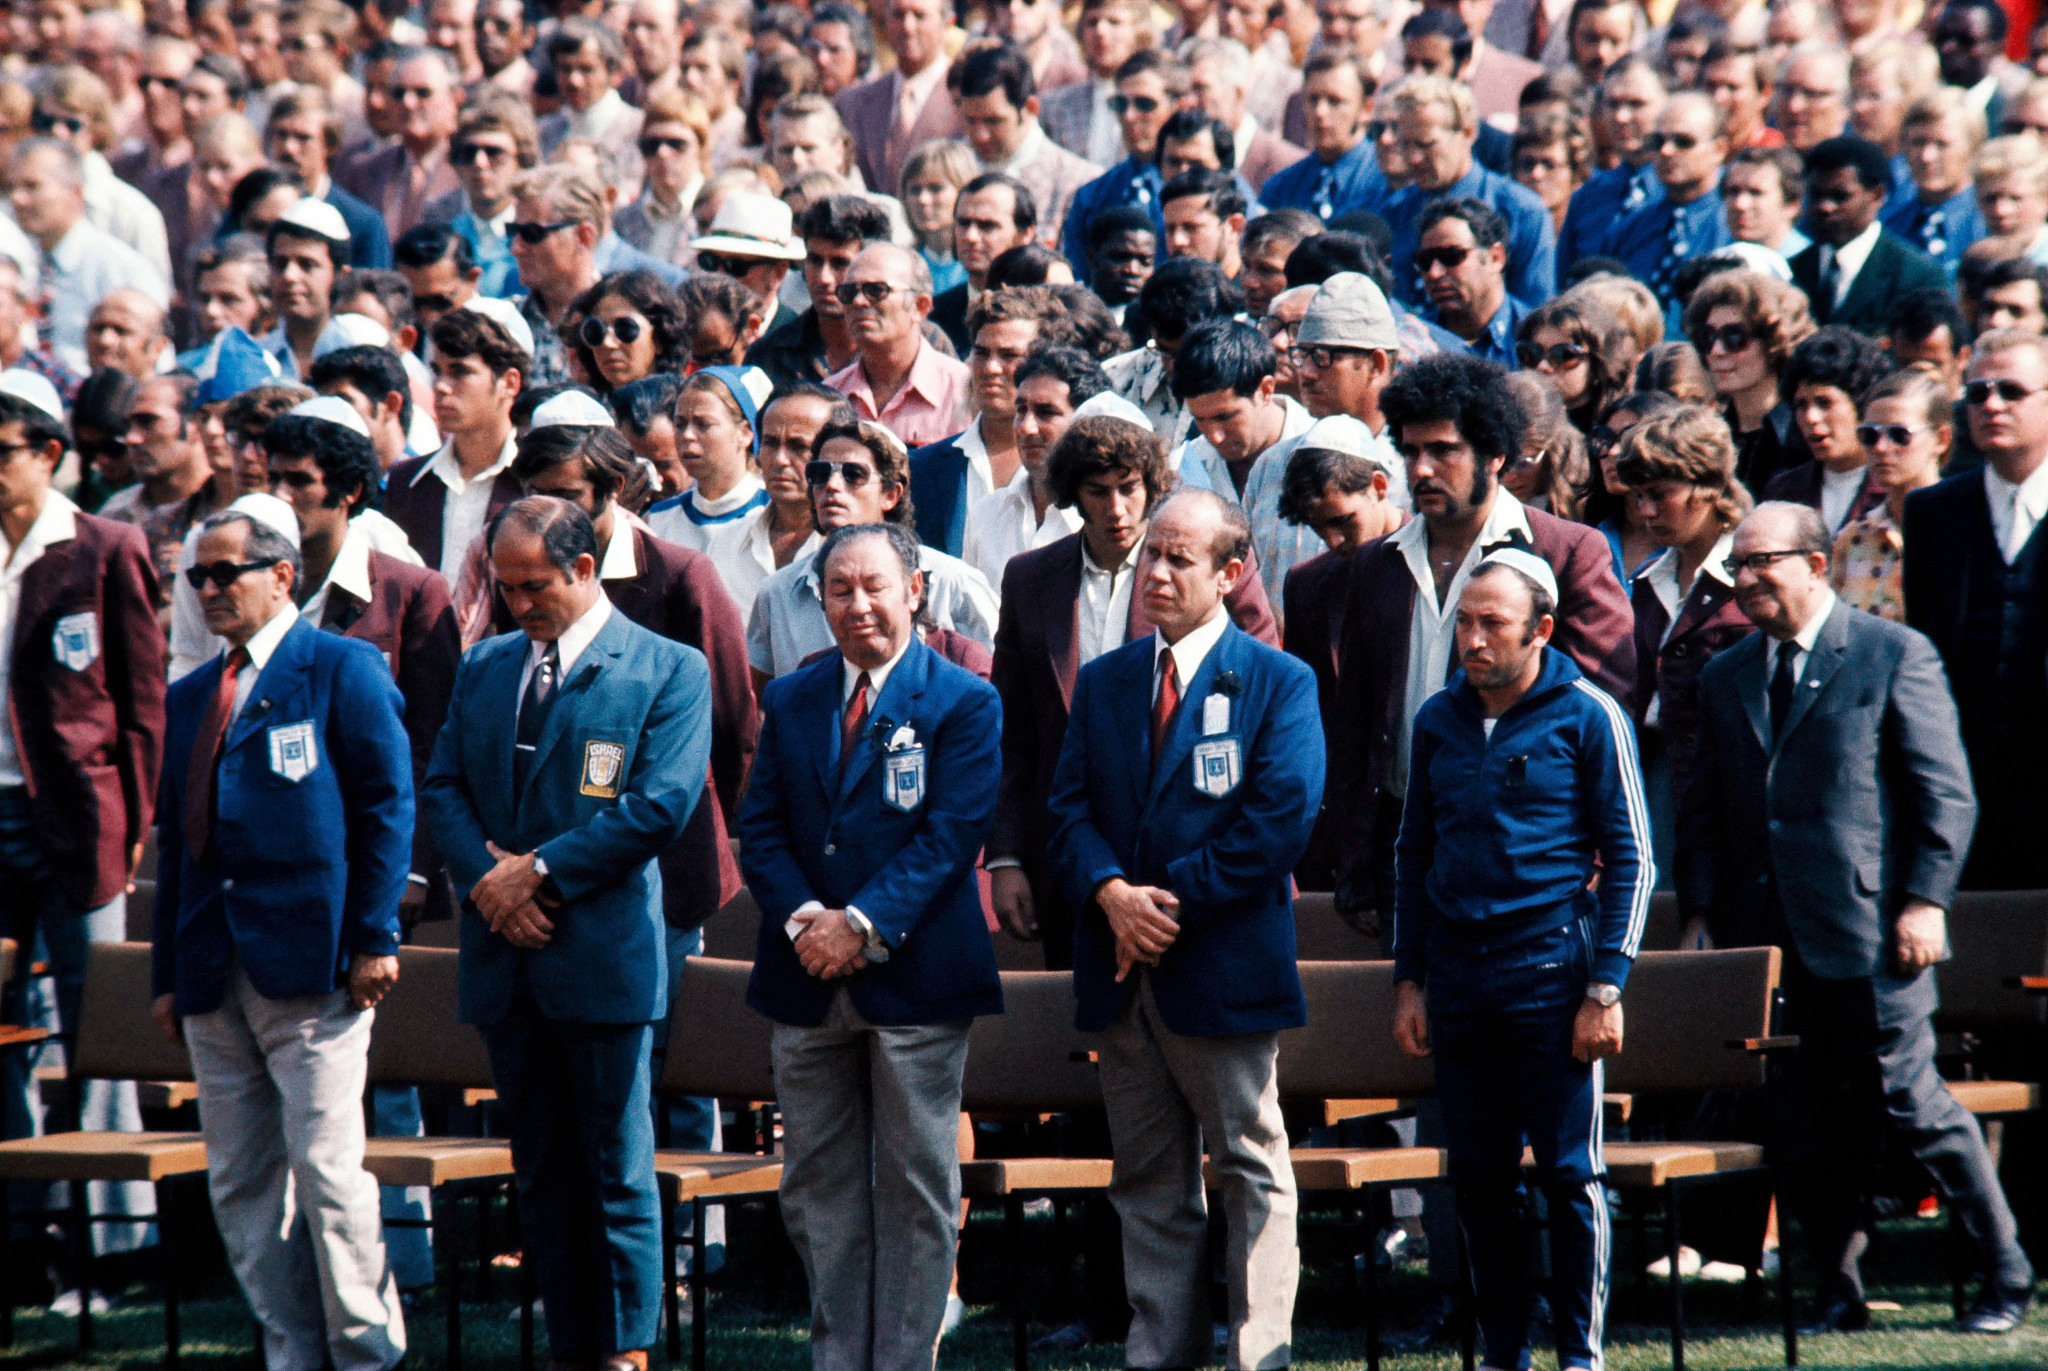 Members of the Israeli team at a hastily-conceived memorial service in 1972  ©Getty Images